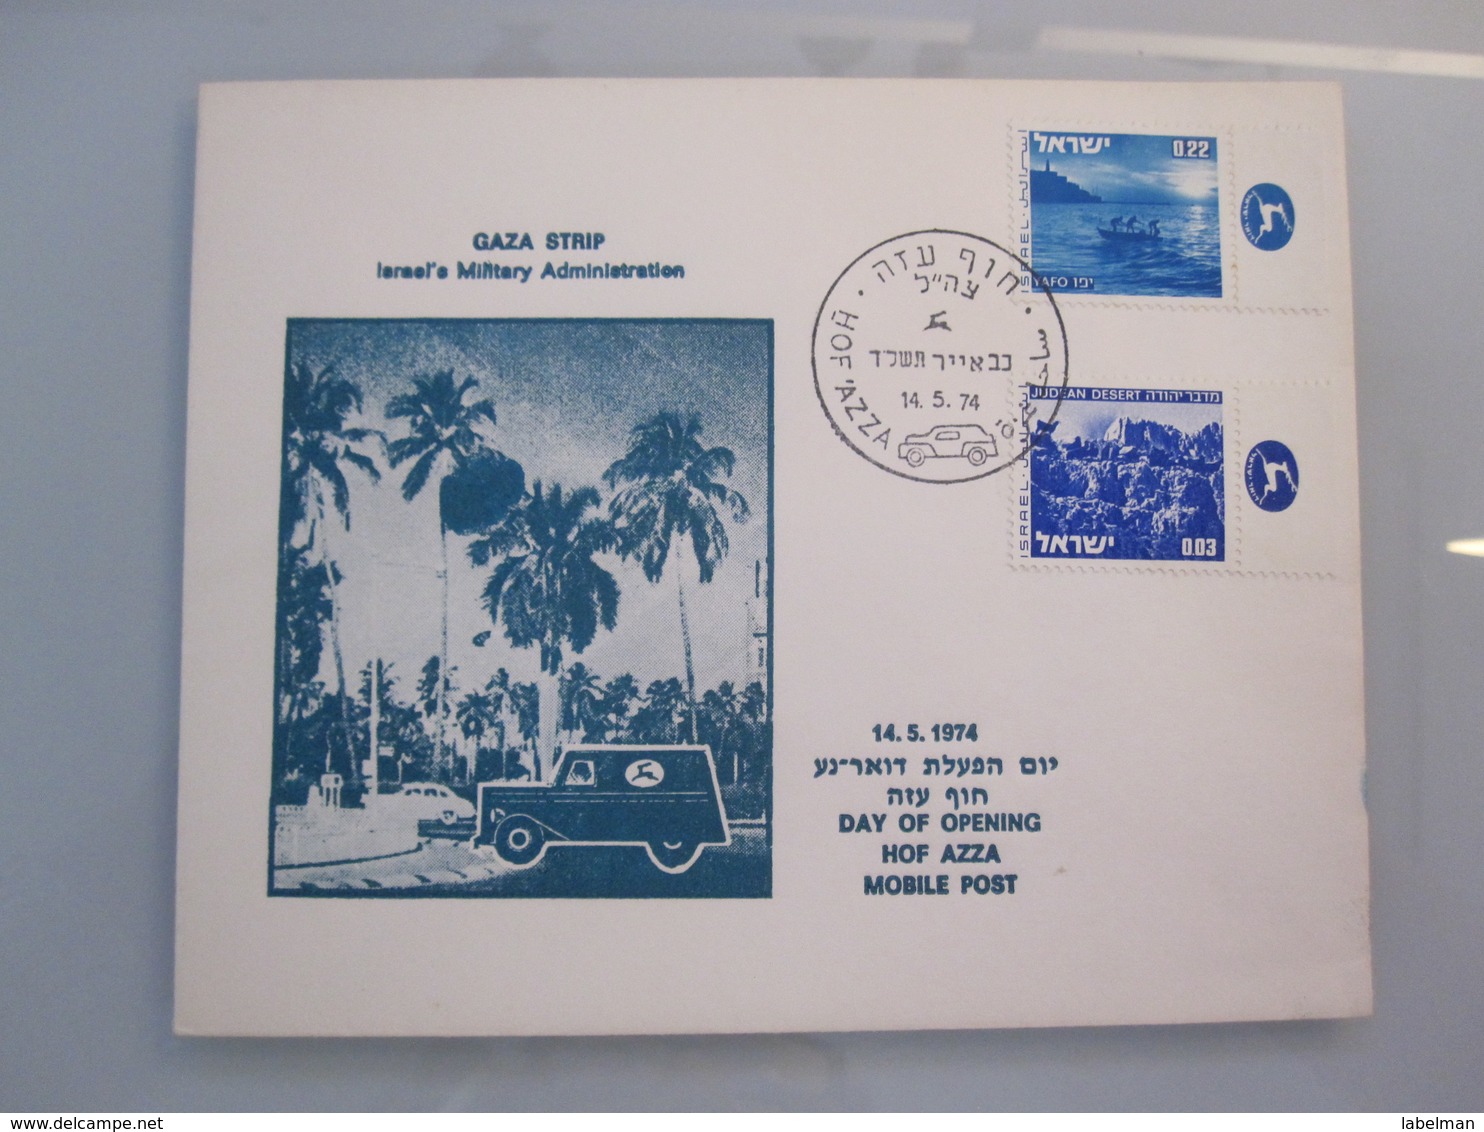 1974 POO FIRST DAY POST OFFICE OPENING MILITARY GOVERNMENT GAZA STRIP SHORE MOBILE EGYPT 6 DAYS WAR COVER ISRAEL CACHET - Covers & Documents